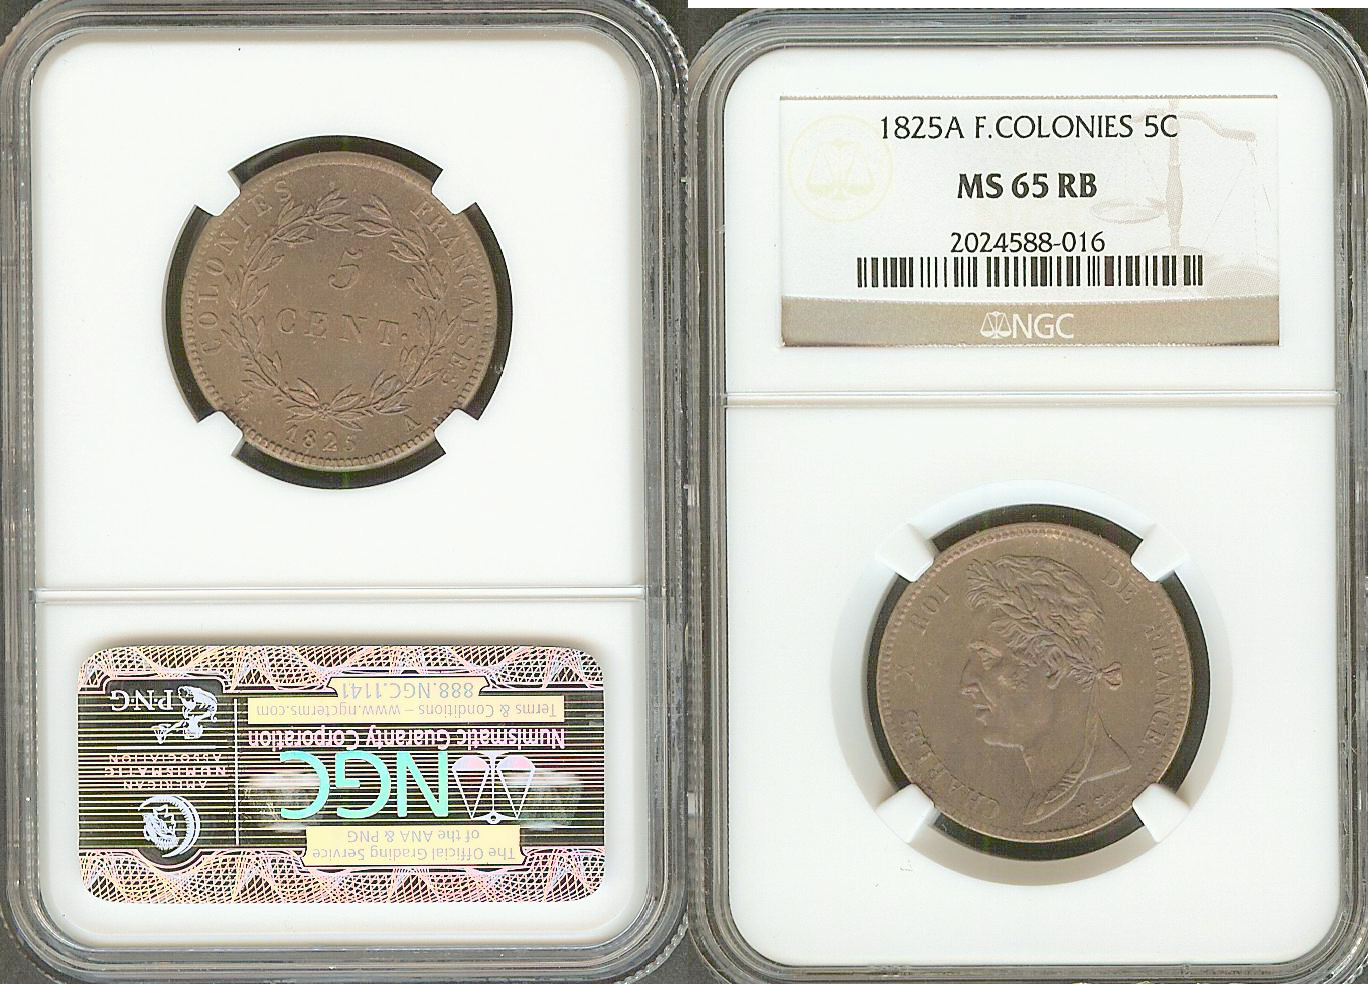 Charles X French Colonies 5 centimes 1825A NGC MS65